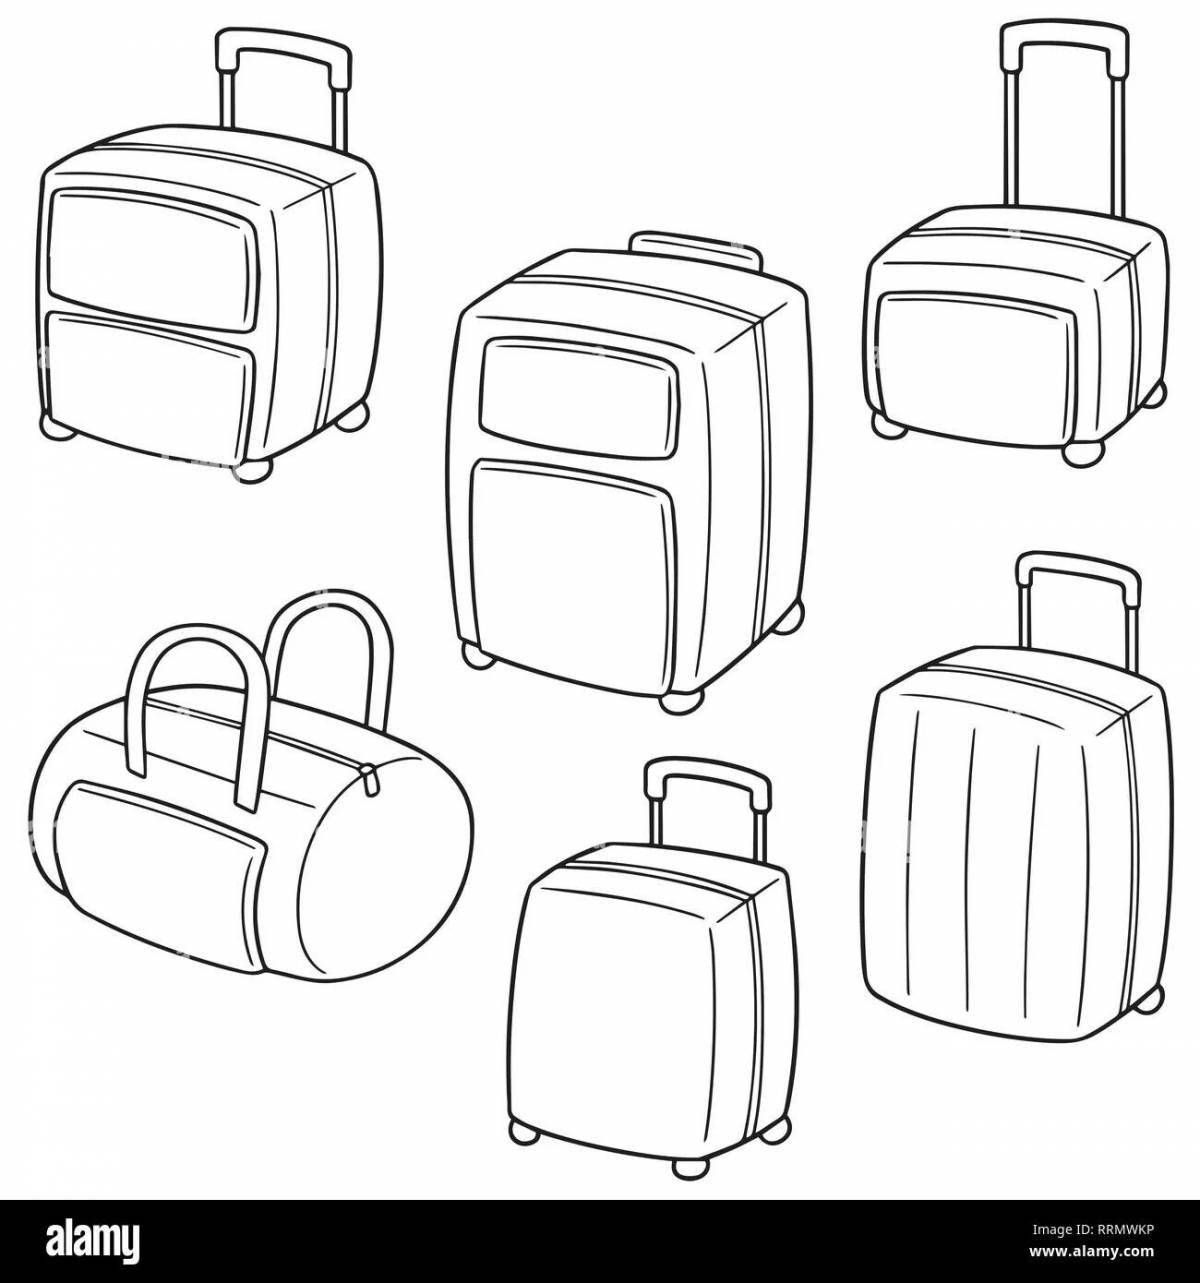 Exquisite suitcase coloring book for kids